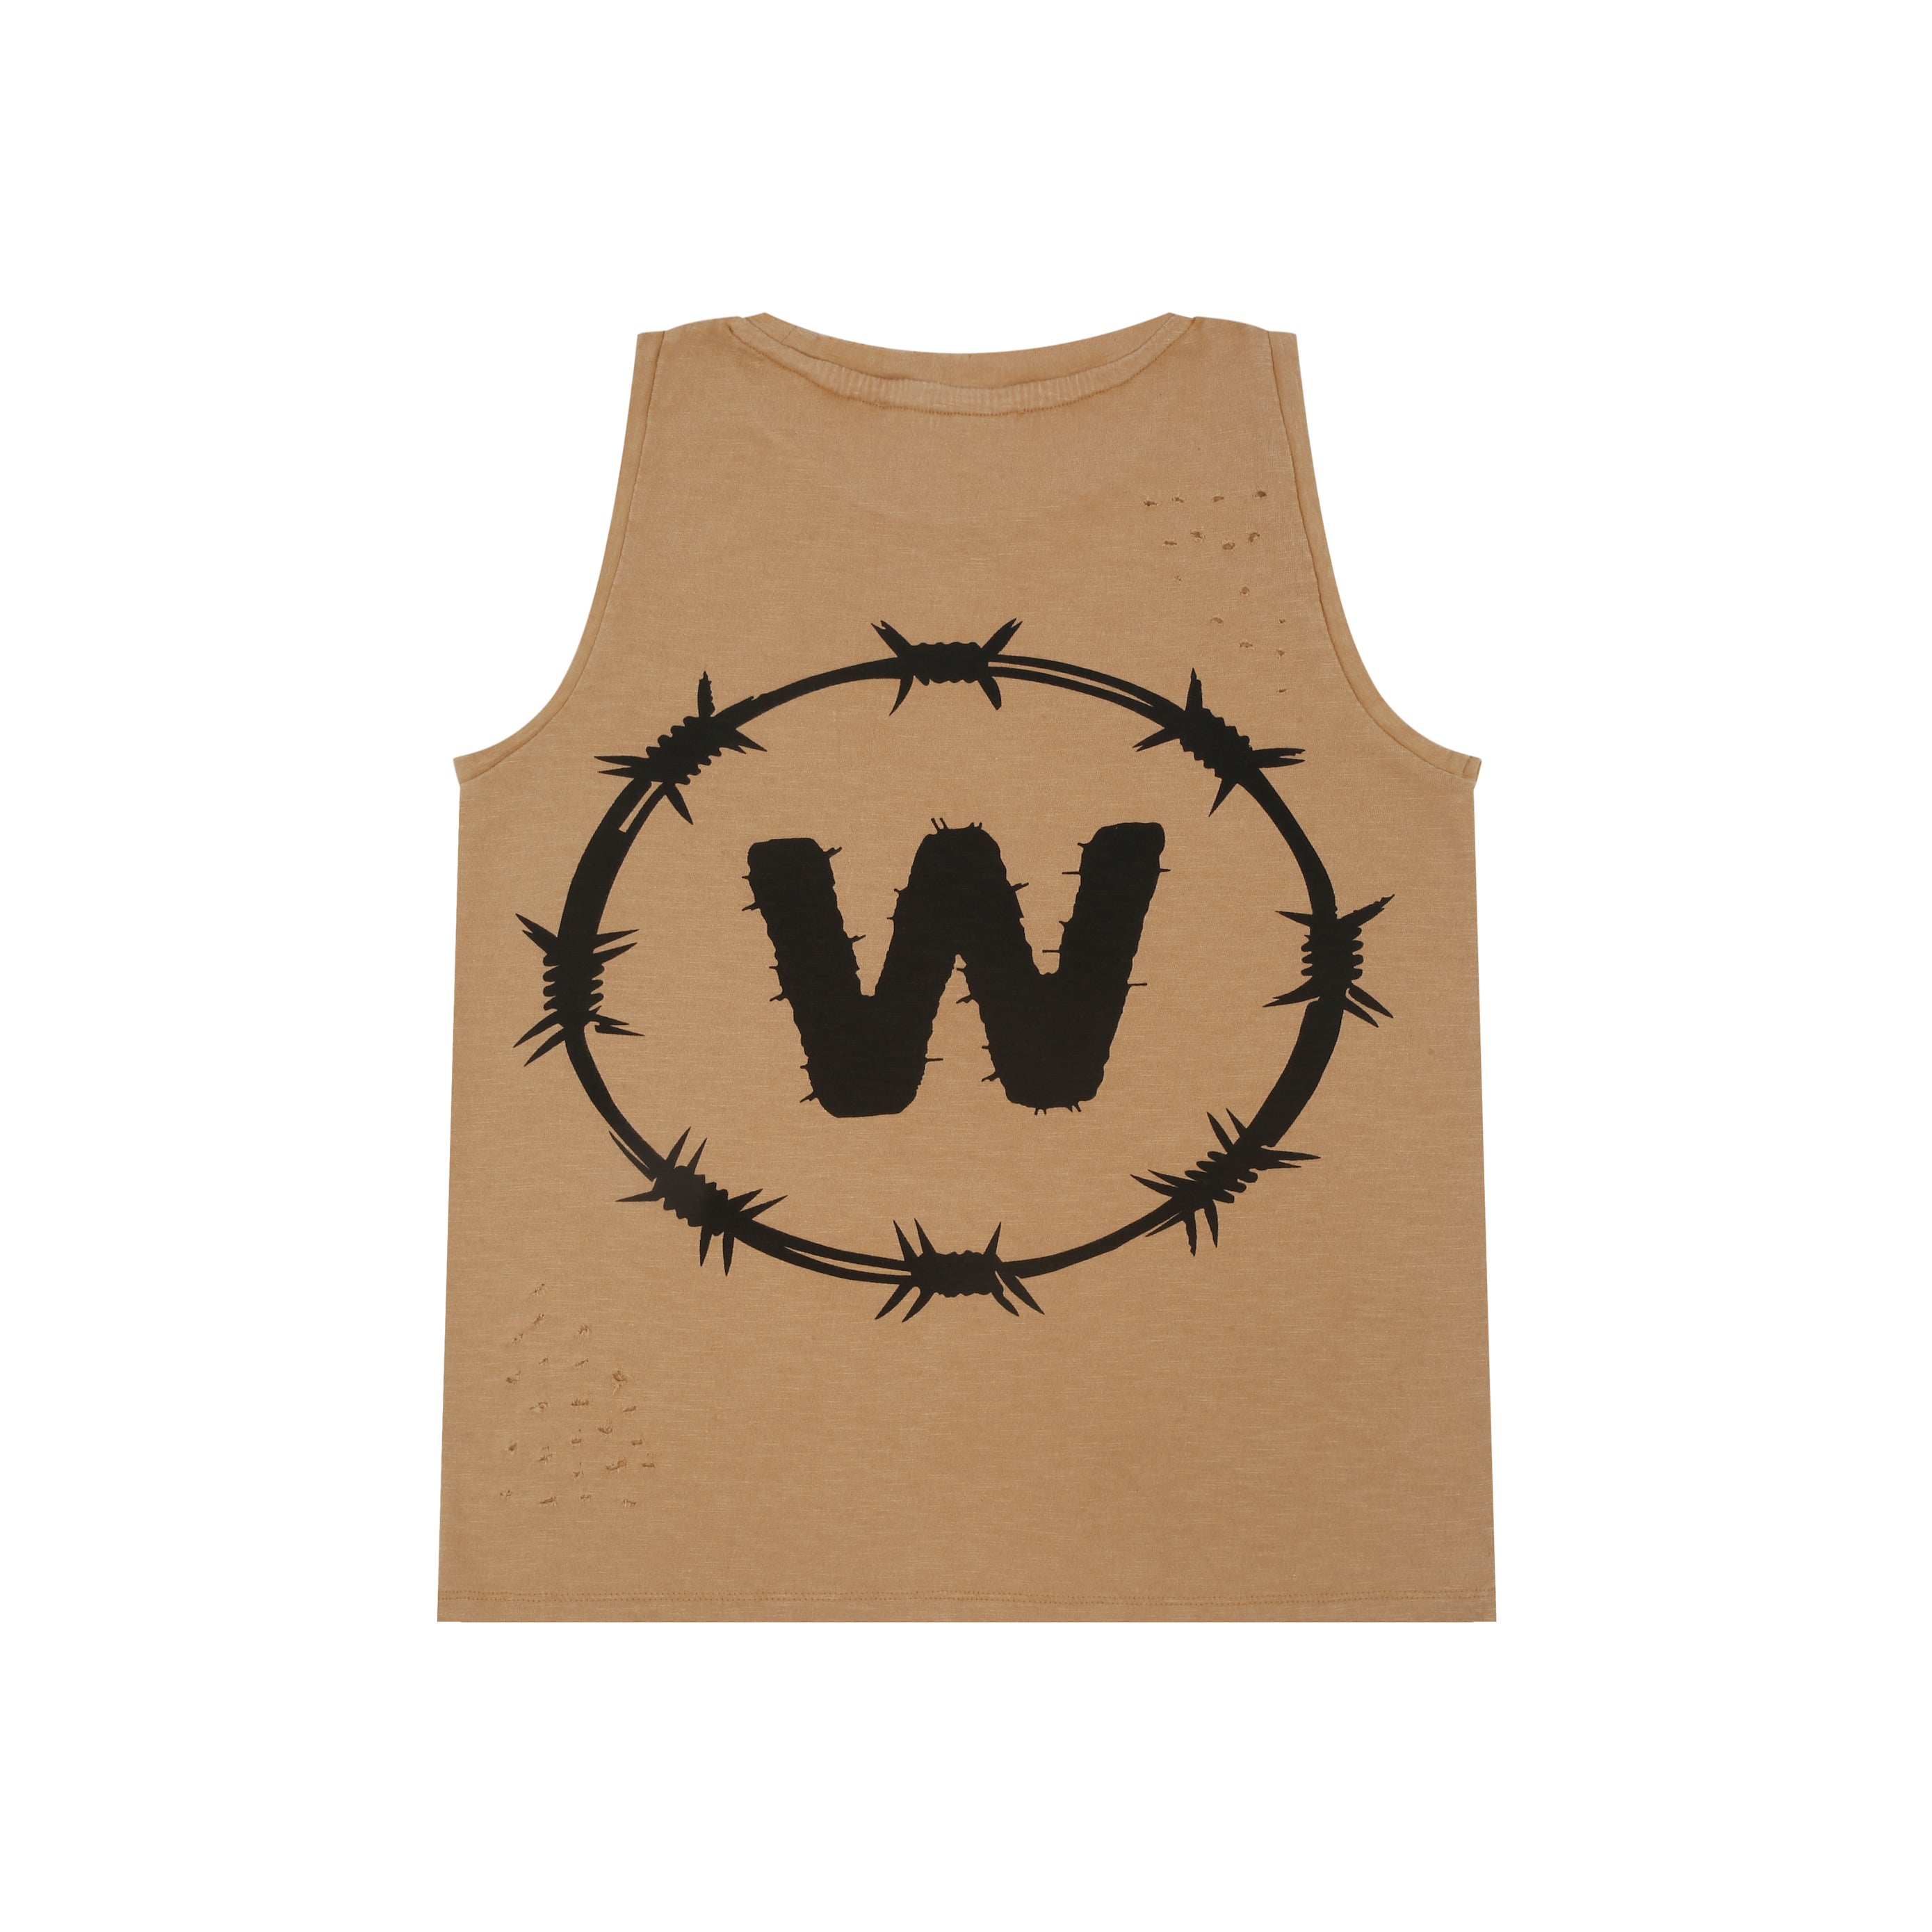 Dune - Round Neck Tank Top "Gone With The Wind"